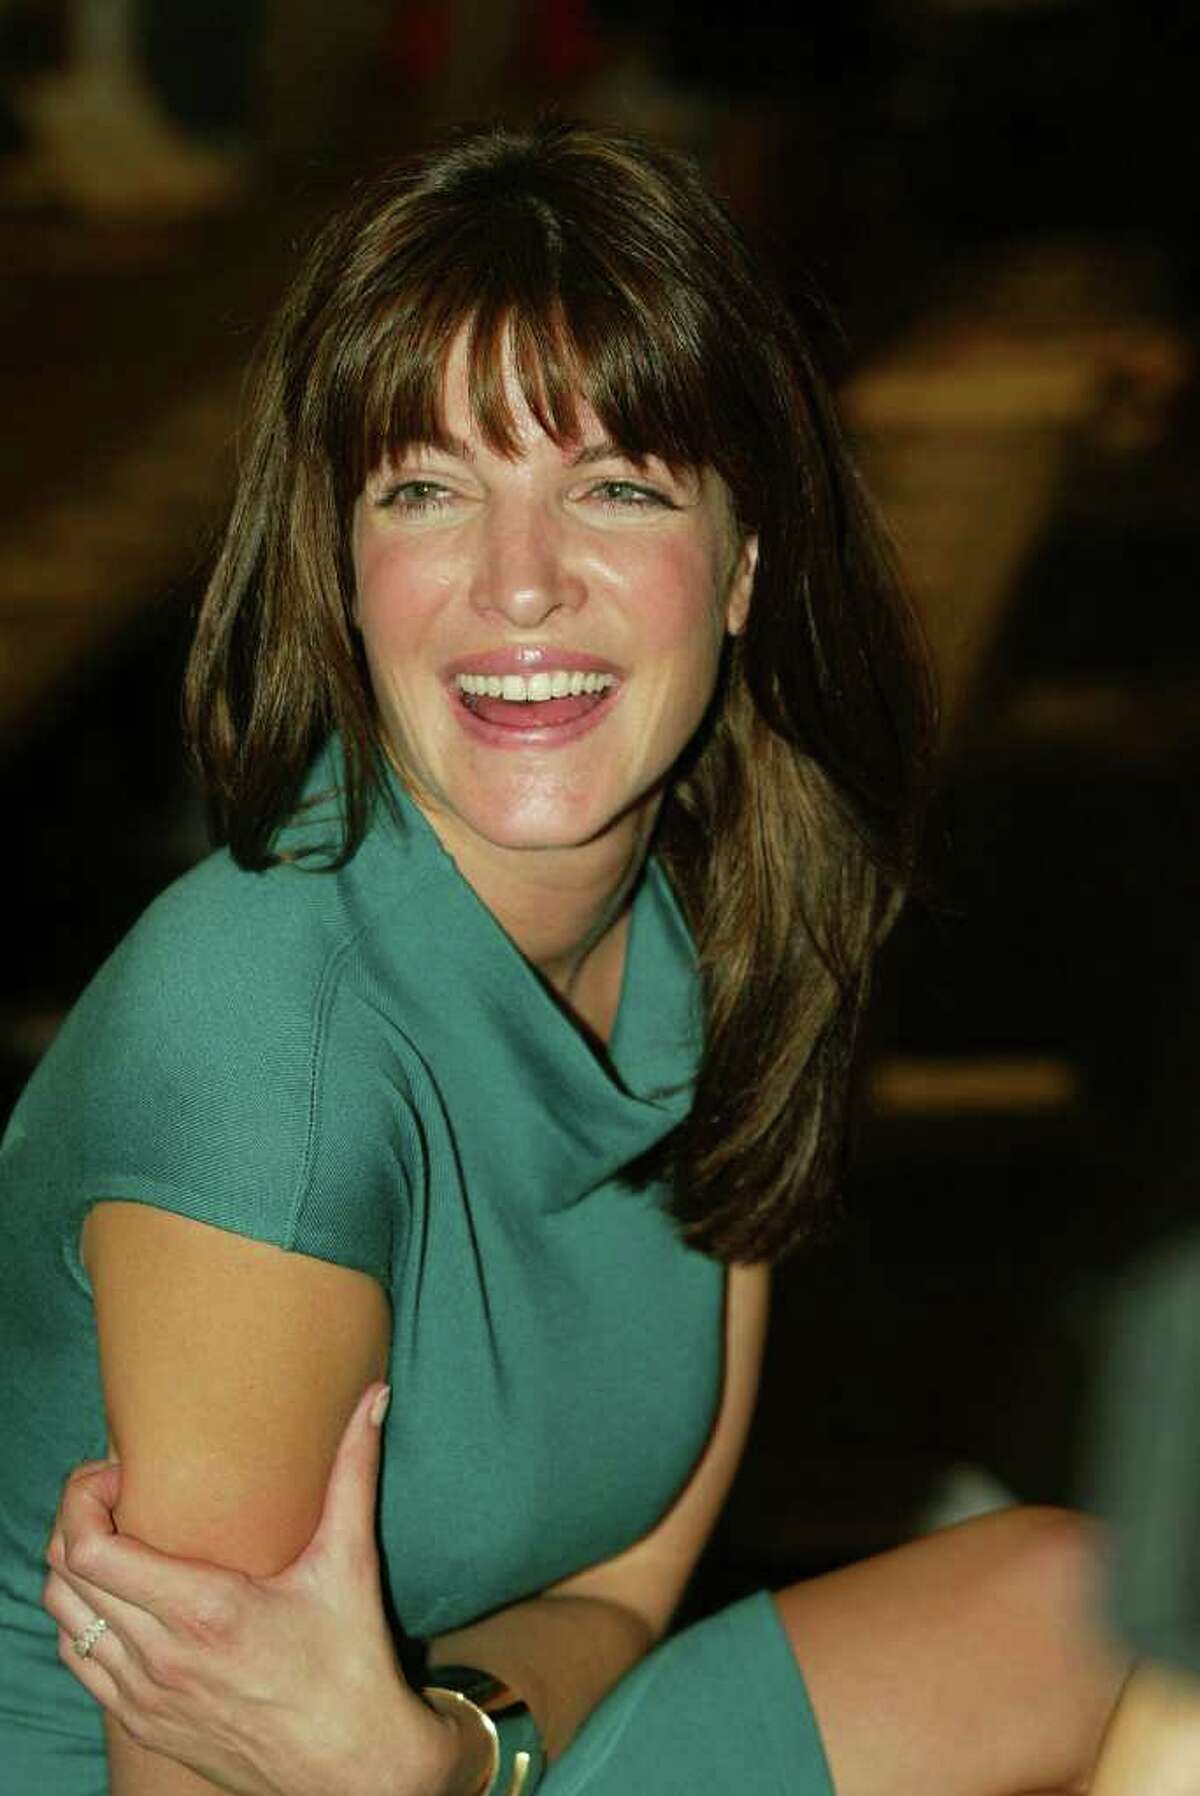 Model Stephanie Seymour attends the Proenza Schouler Spring/Summer 2004 Collection at Bryant Park during the 7th on Sixth Mercedes-Benz Fashion Week on September 17, 2003 in New York City.